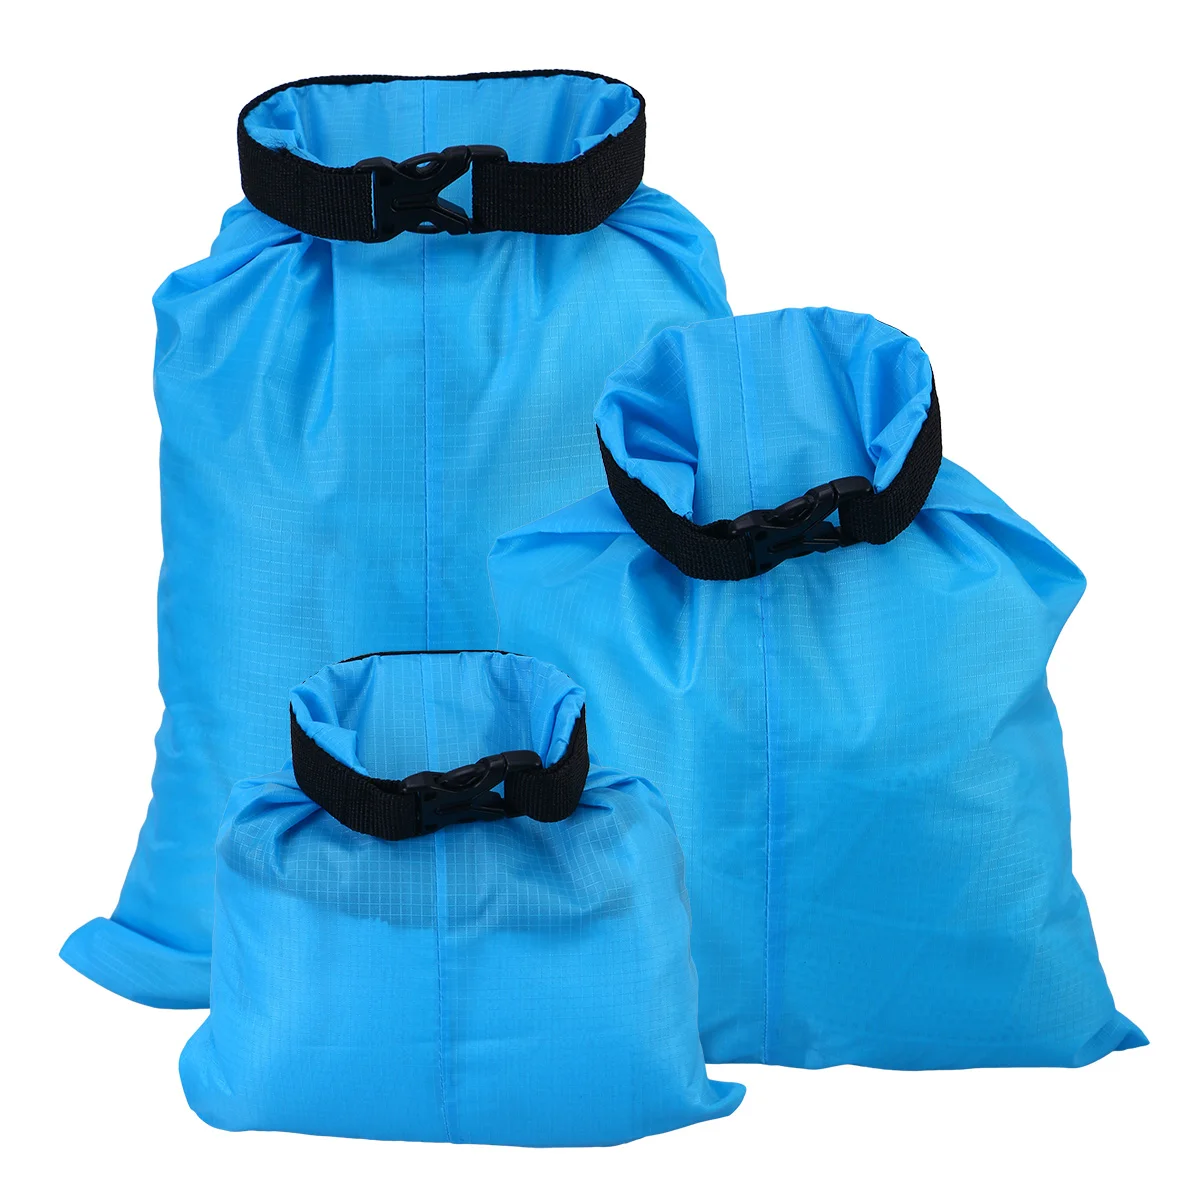 

WINOMO 3pcs 15L+25L+35L Waterproof Dry Bag Storage Pouch Bag for Camping Boating Kayaking Rafting Fishing (Sky Blue)